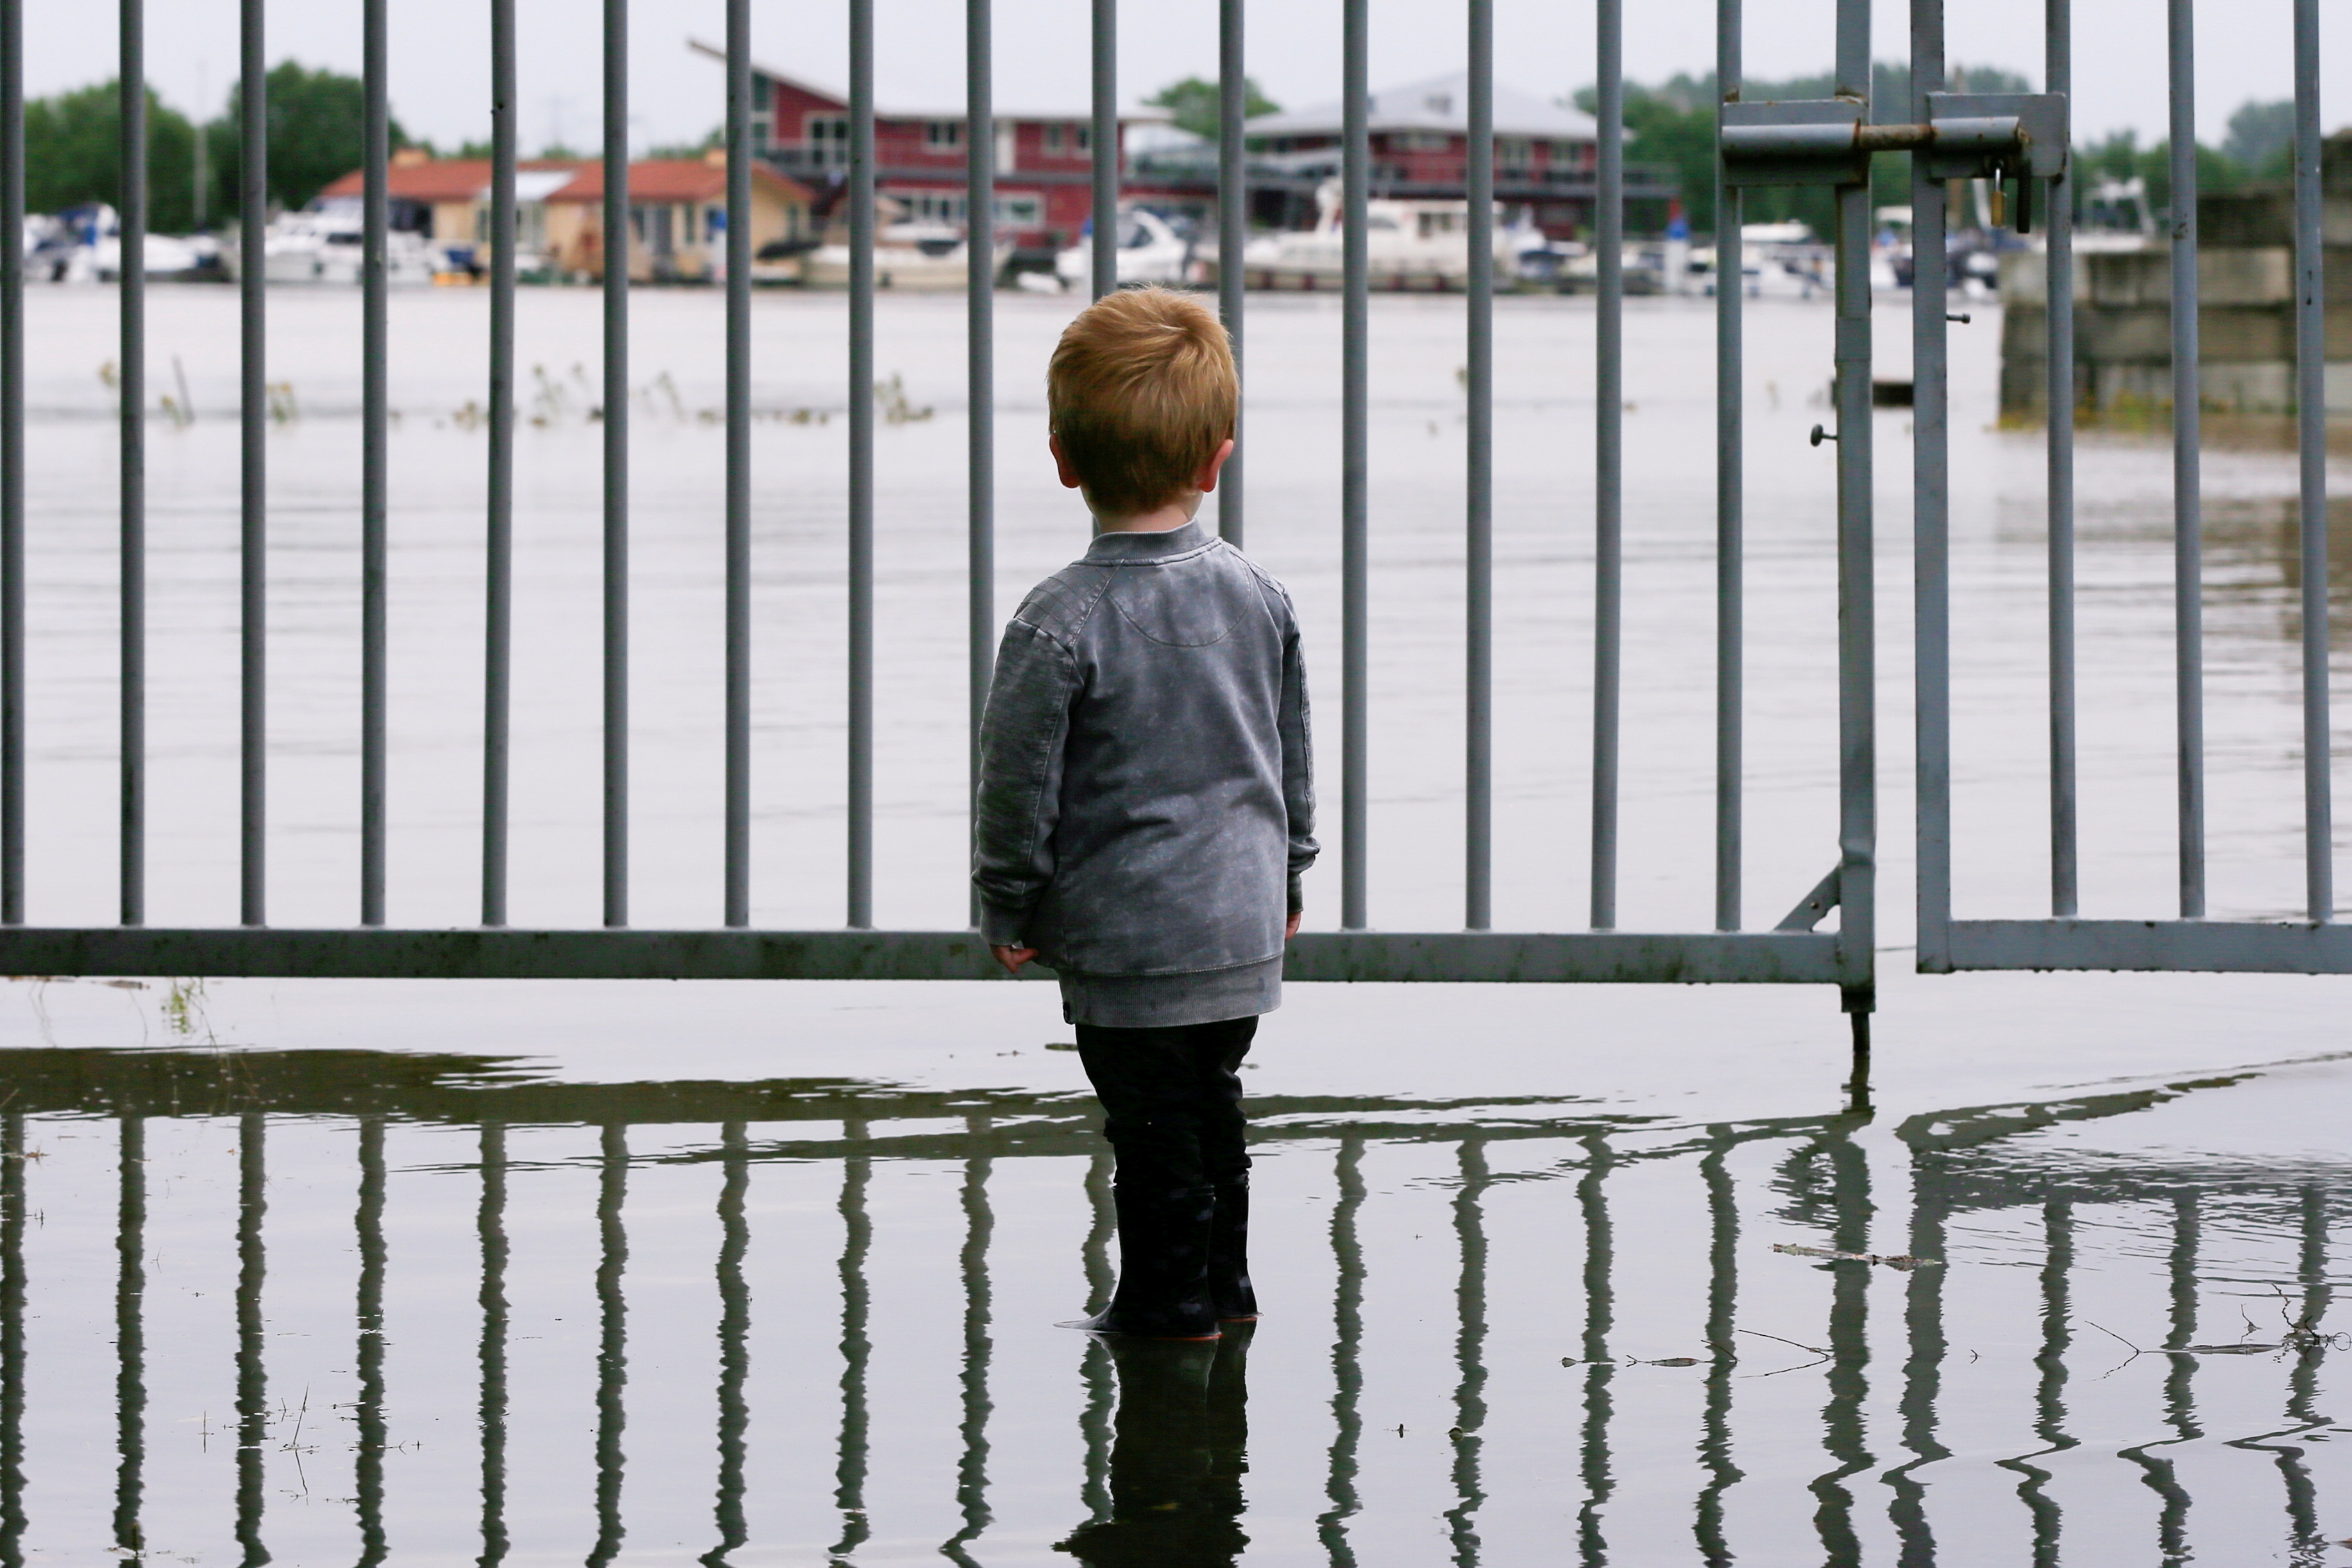 A child looks on as water floods through a fence in Wessem